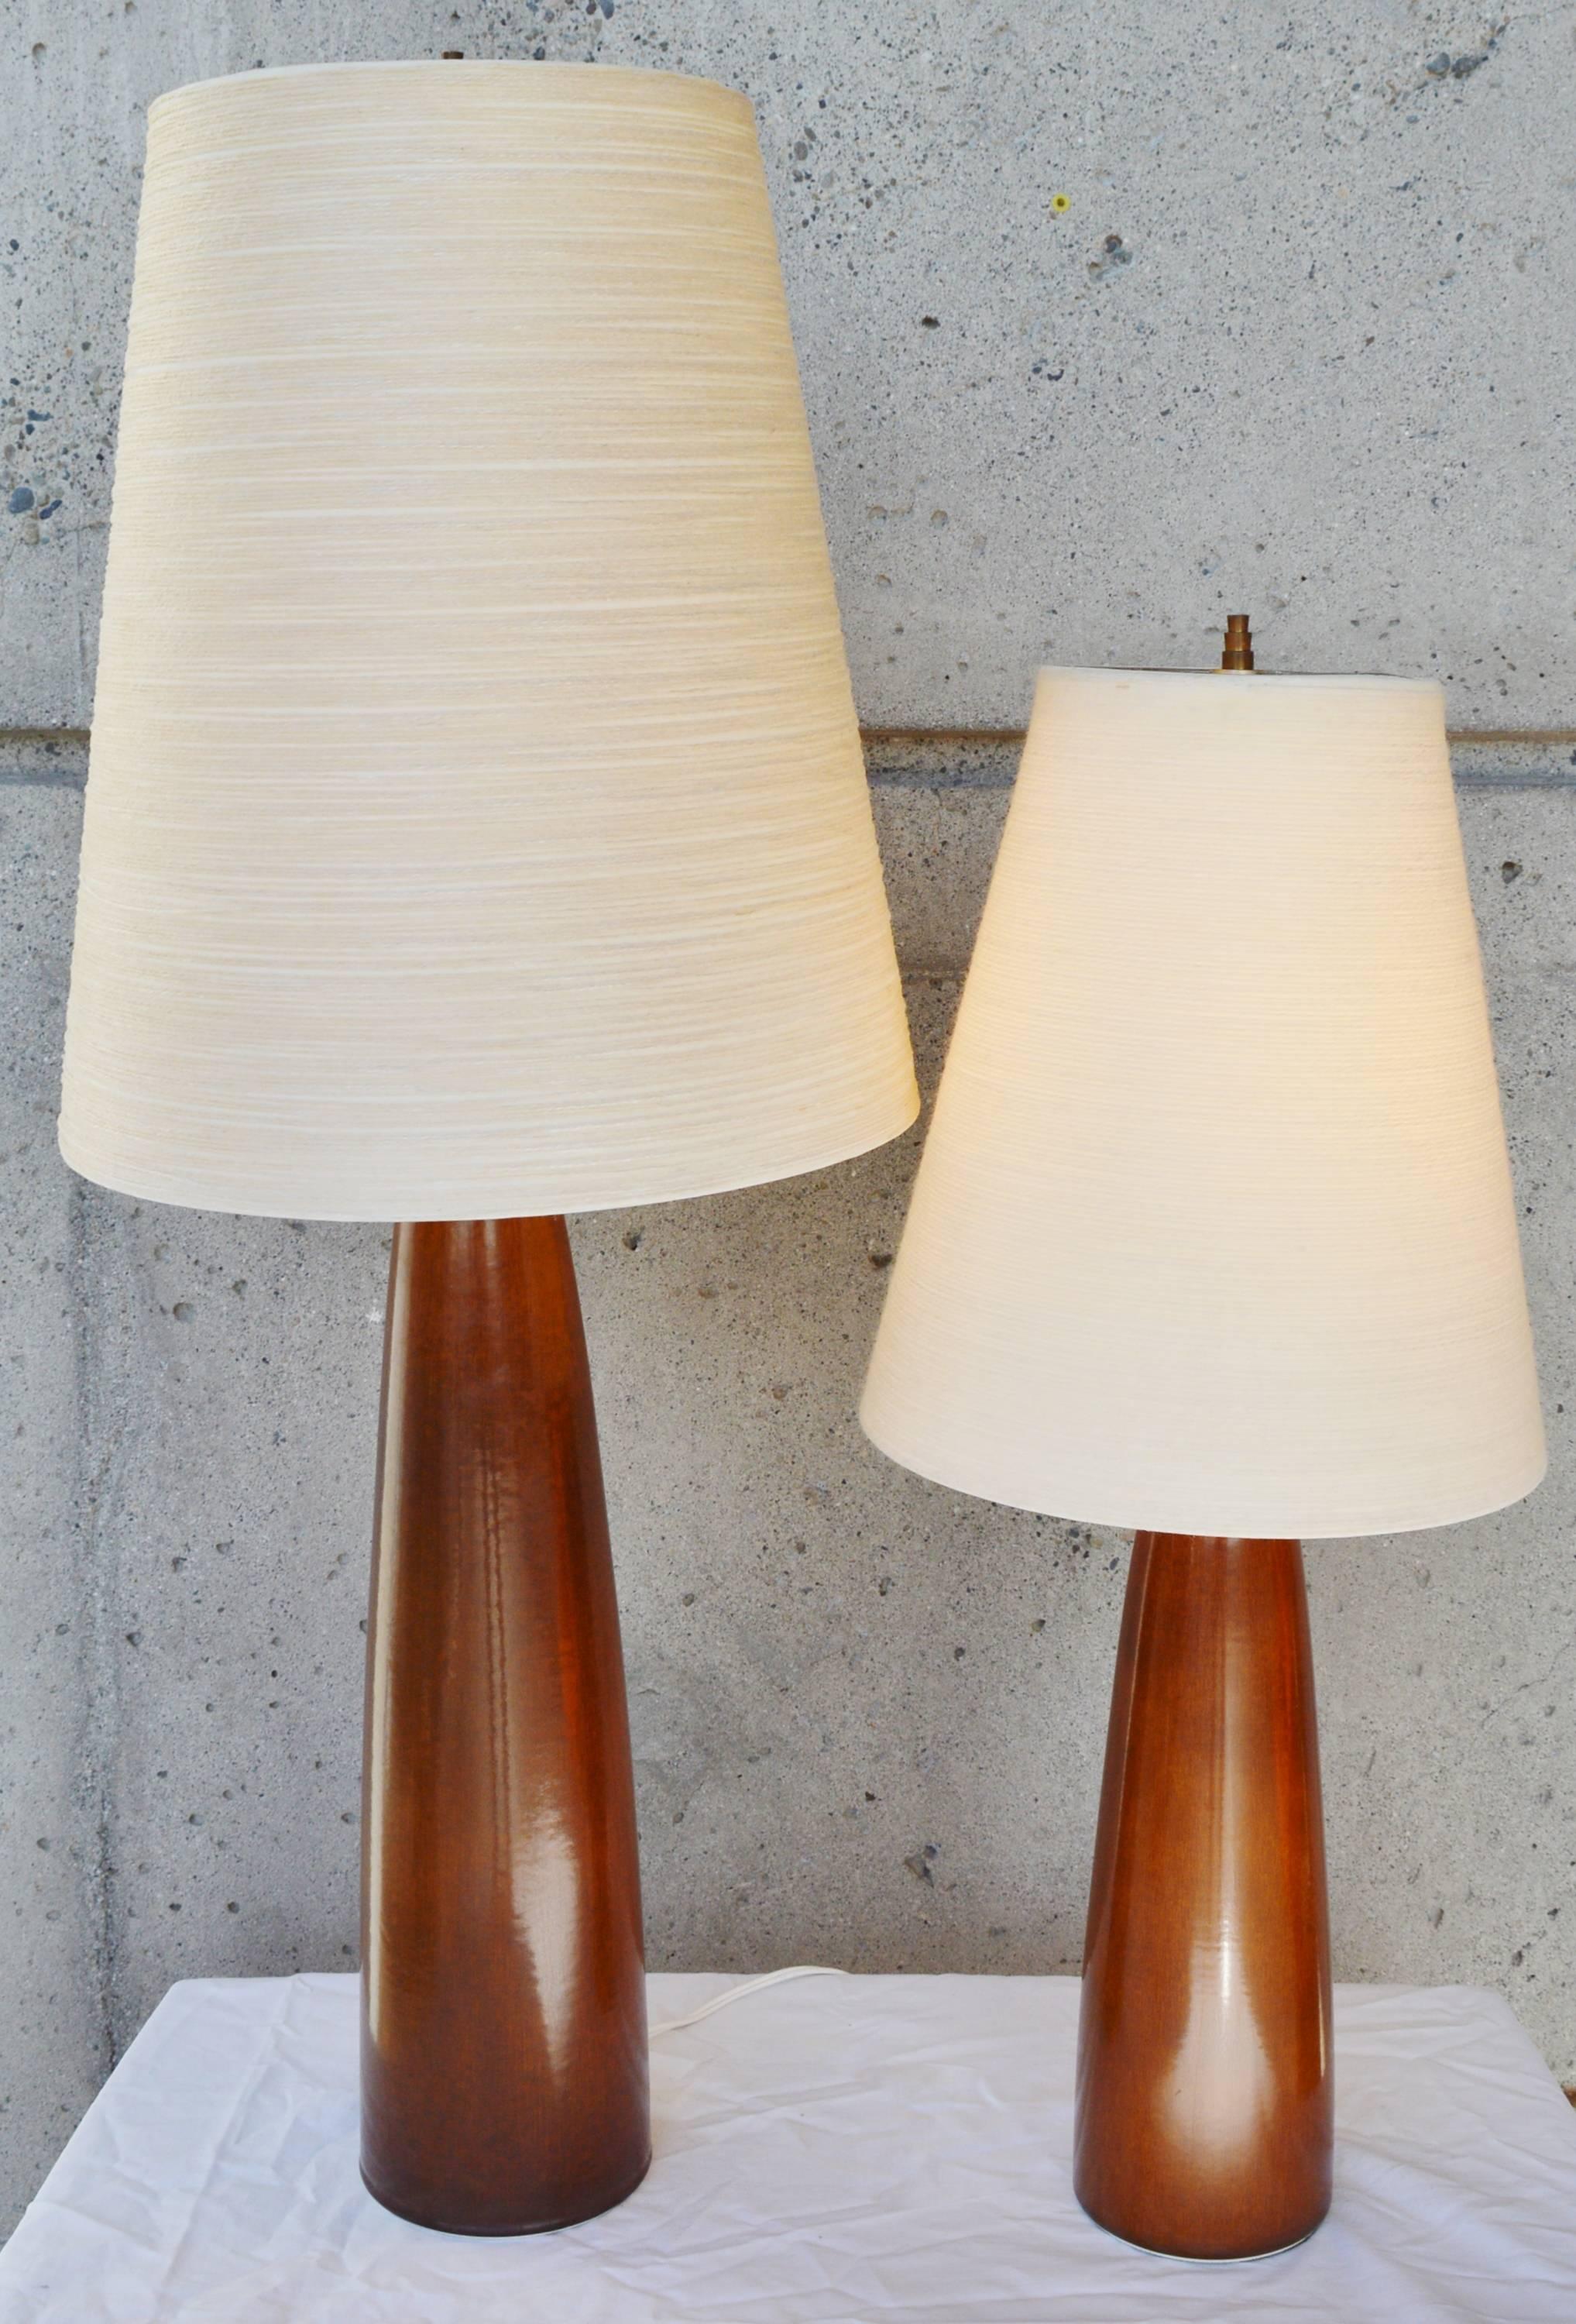 These early sculptural ceramic lamps by Lotte and Gunnar Bostlund - a Danish born couple who moved their lamp making company to Canada in the 1960s. The lamps are the same style and design, but one is larger than the other - a great design feature